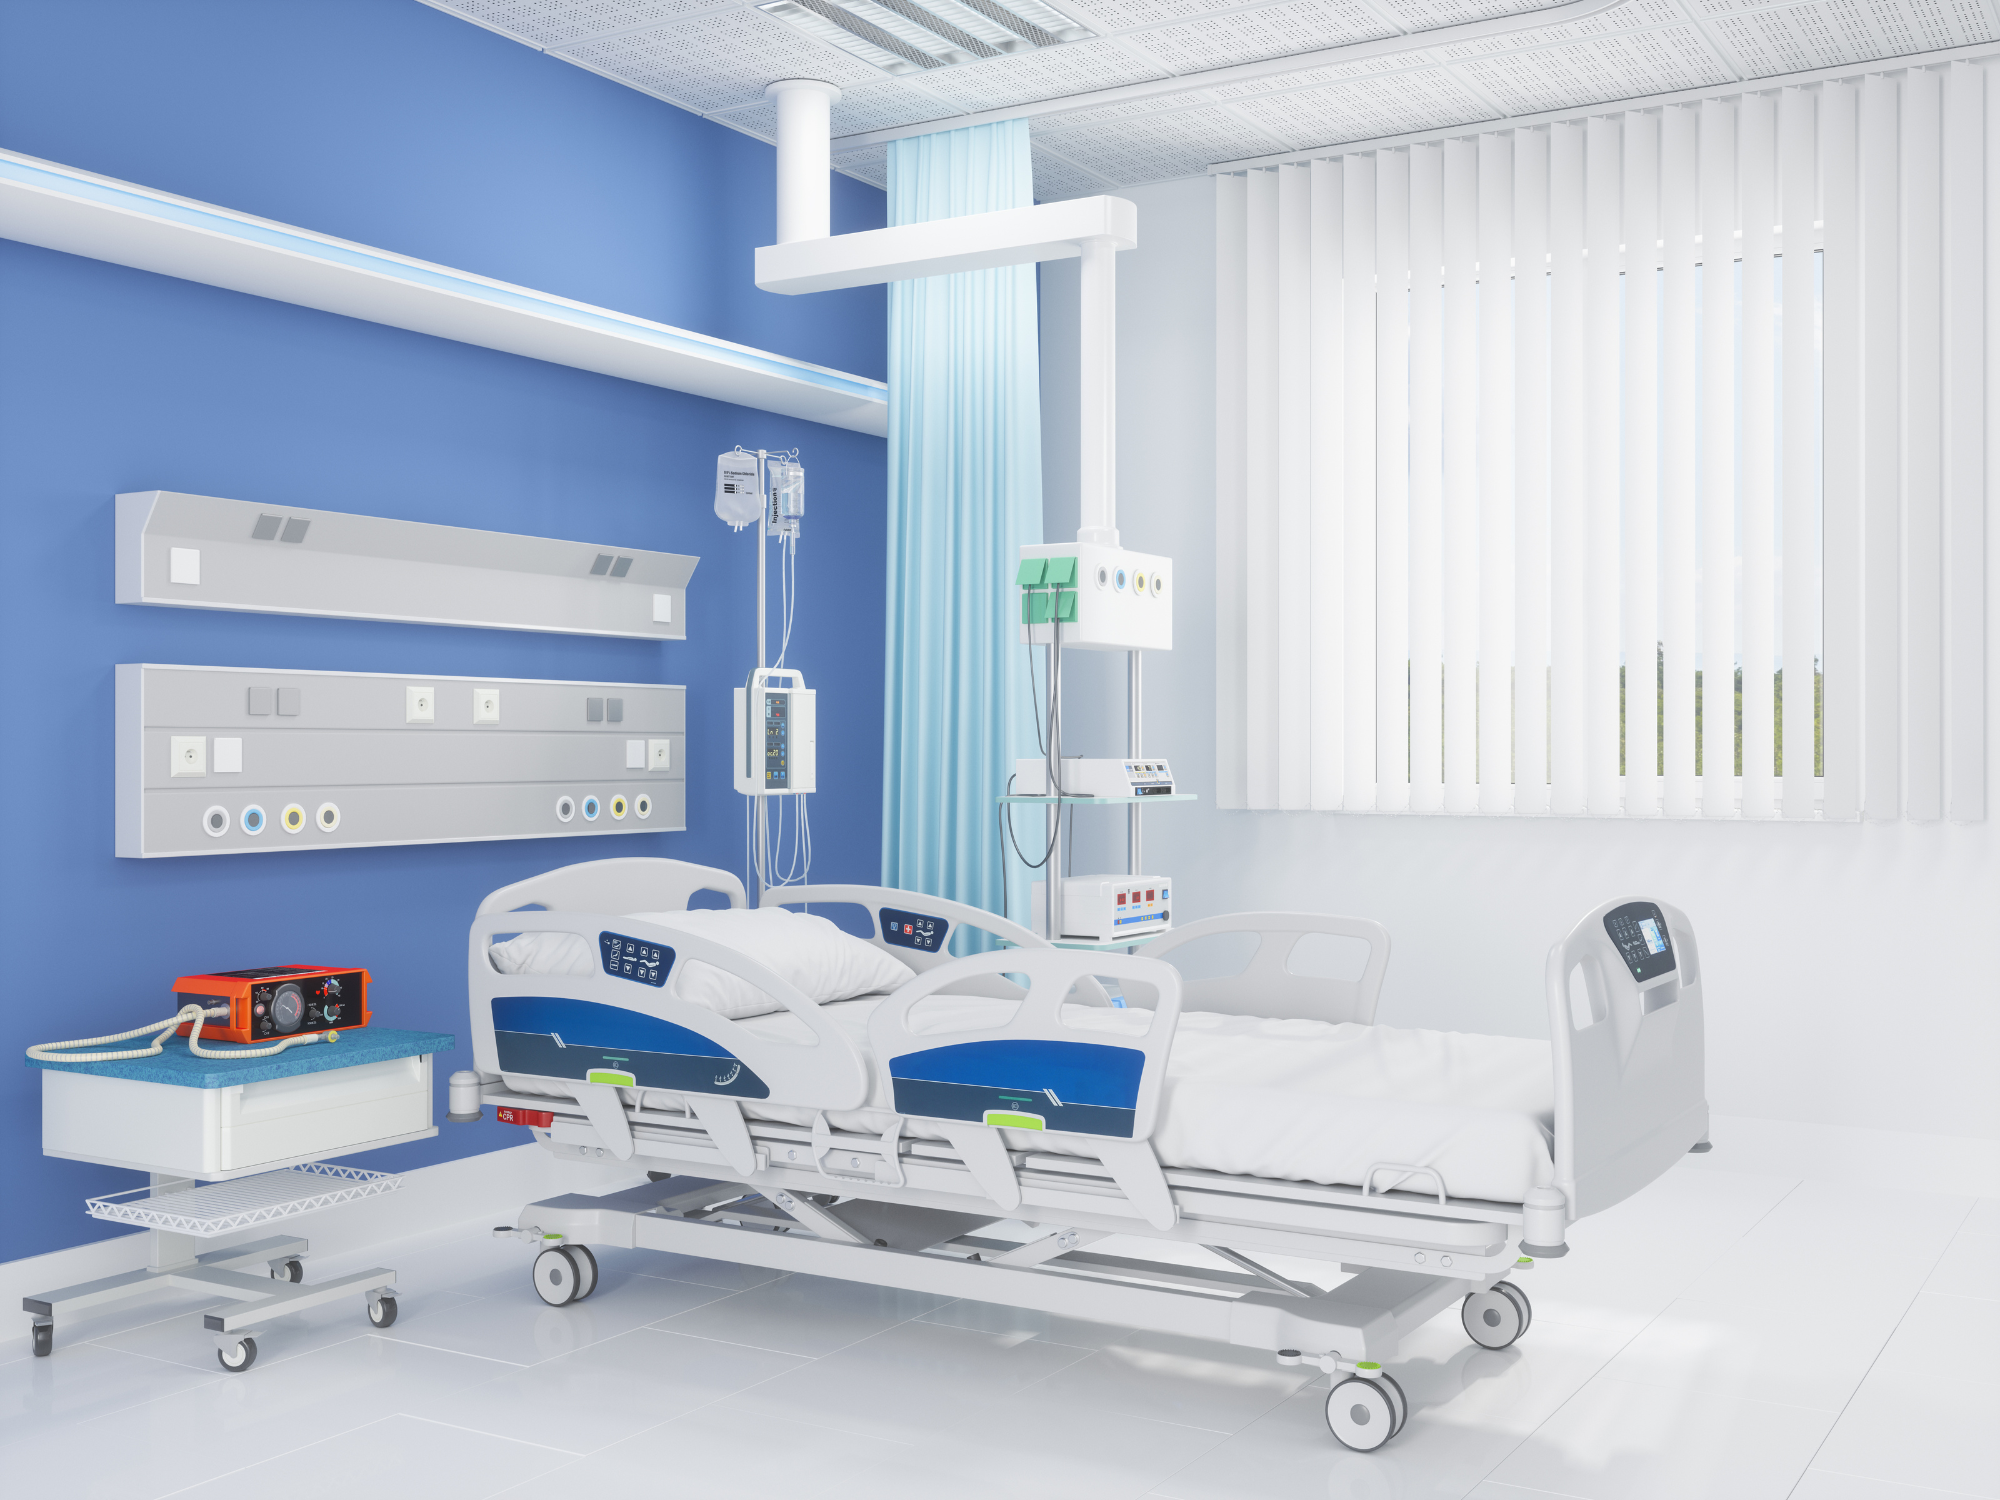 Purchase Options at the End of Medical Equipment Leases in Healthcare